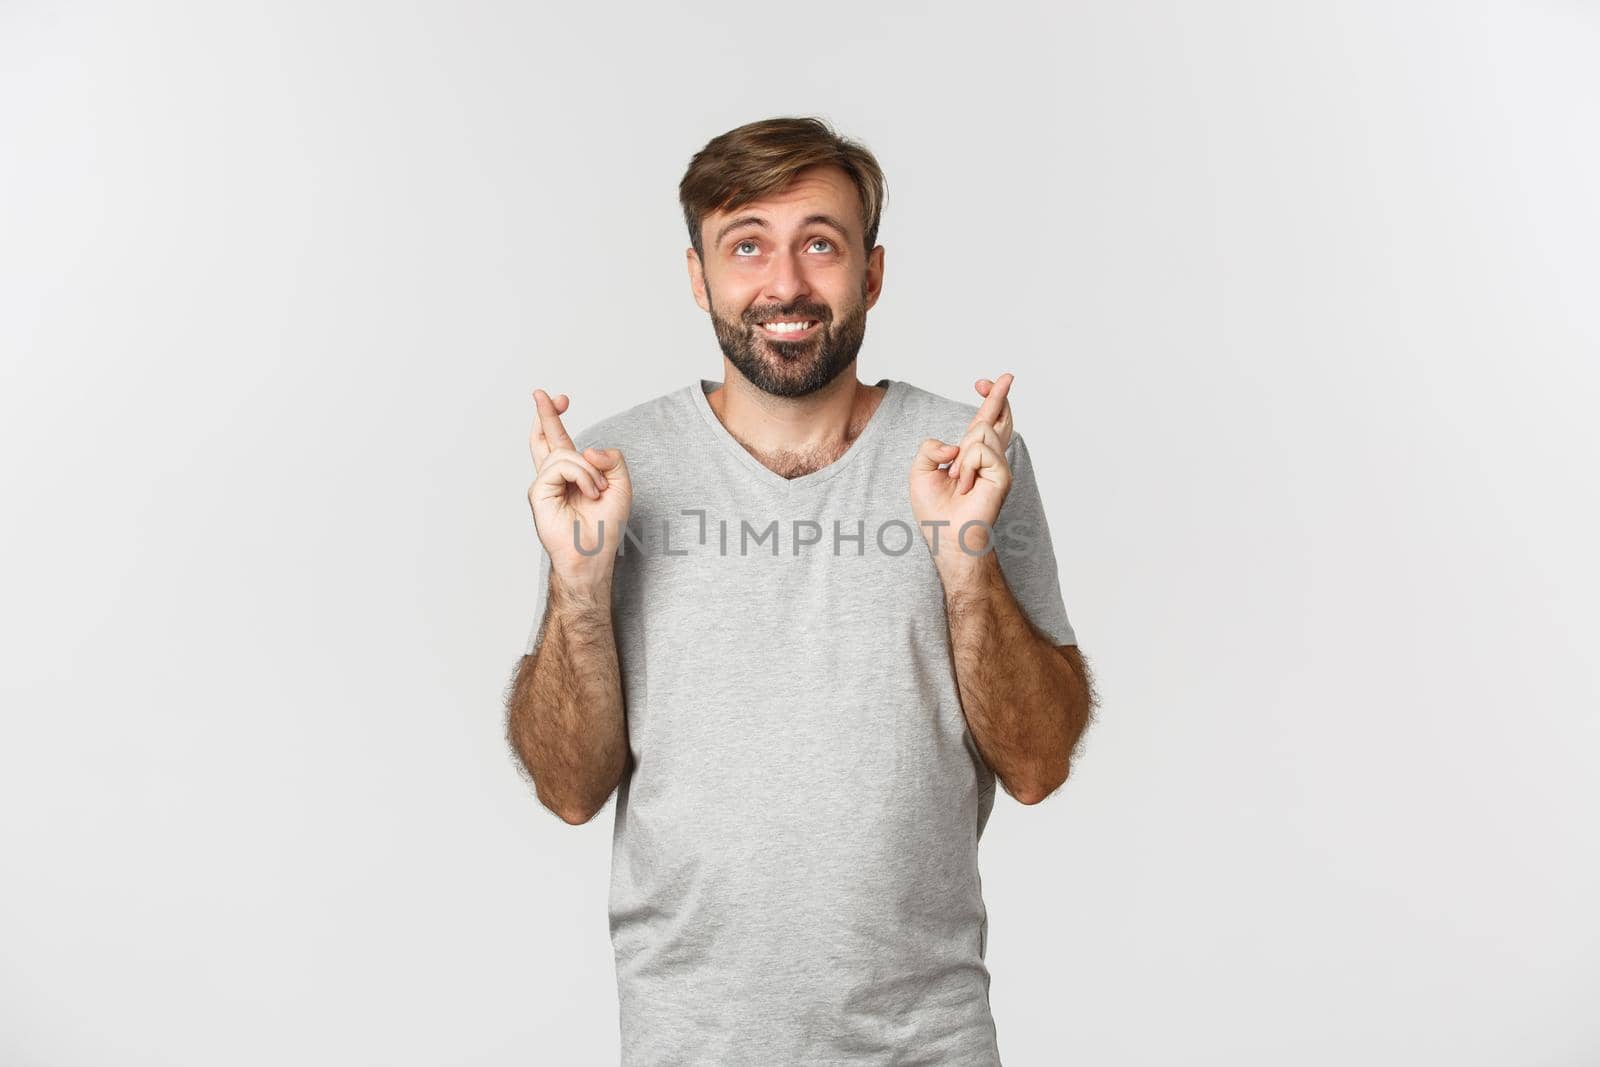 Hopeful smiling man in gray t-shirt, looking up and making wish, crossing fingers for good luck, standing over white background.